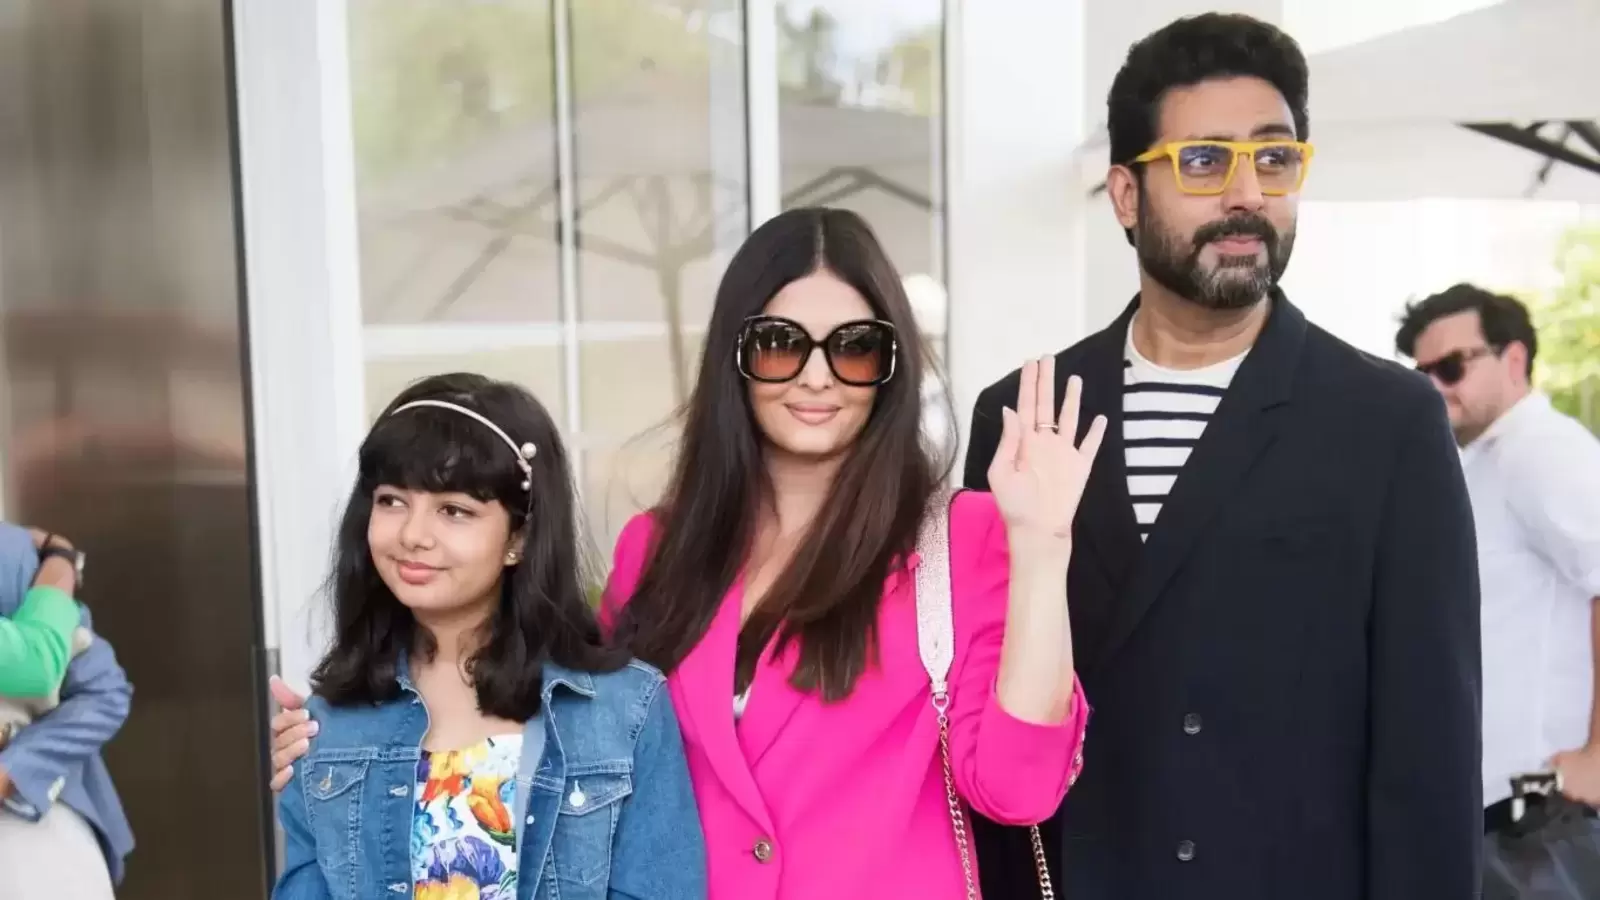 Aishwarya Rai waves at fans, poses with Aaradhya and Abhishek Bachchan on their day out in Cannes. See pics